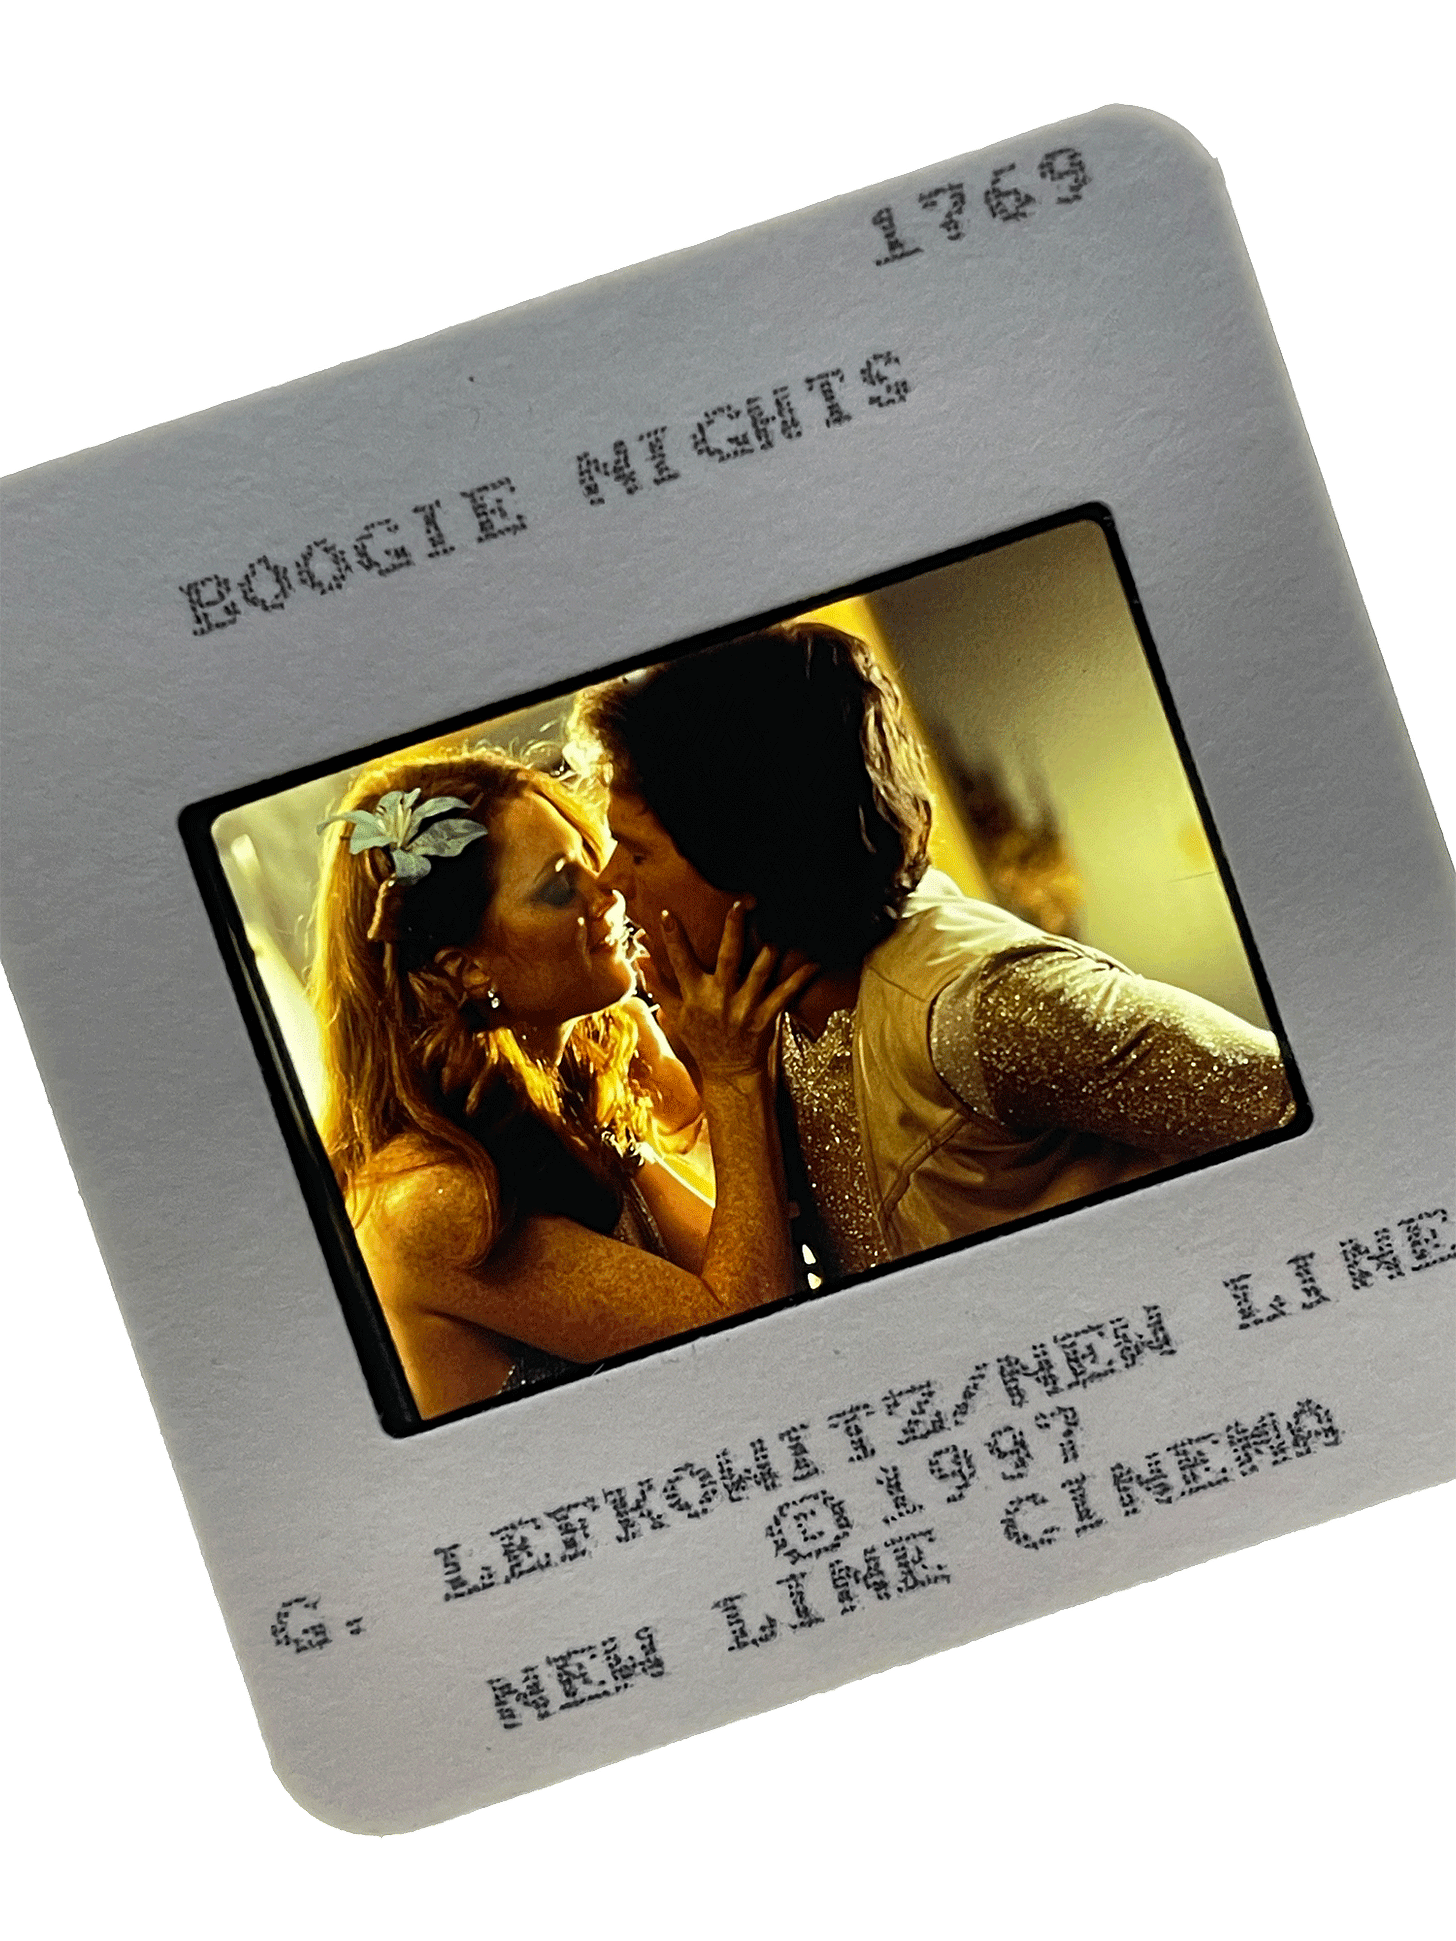 Slide from BOOGIE NIGHTS with Julianne Moore and Mark Whalberg, photo by G. Lefkowitz.